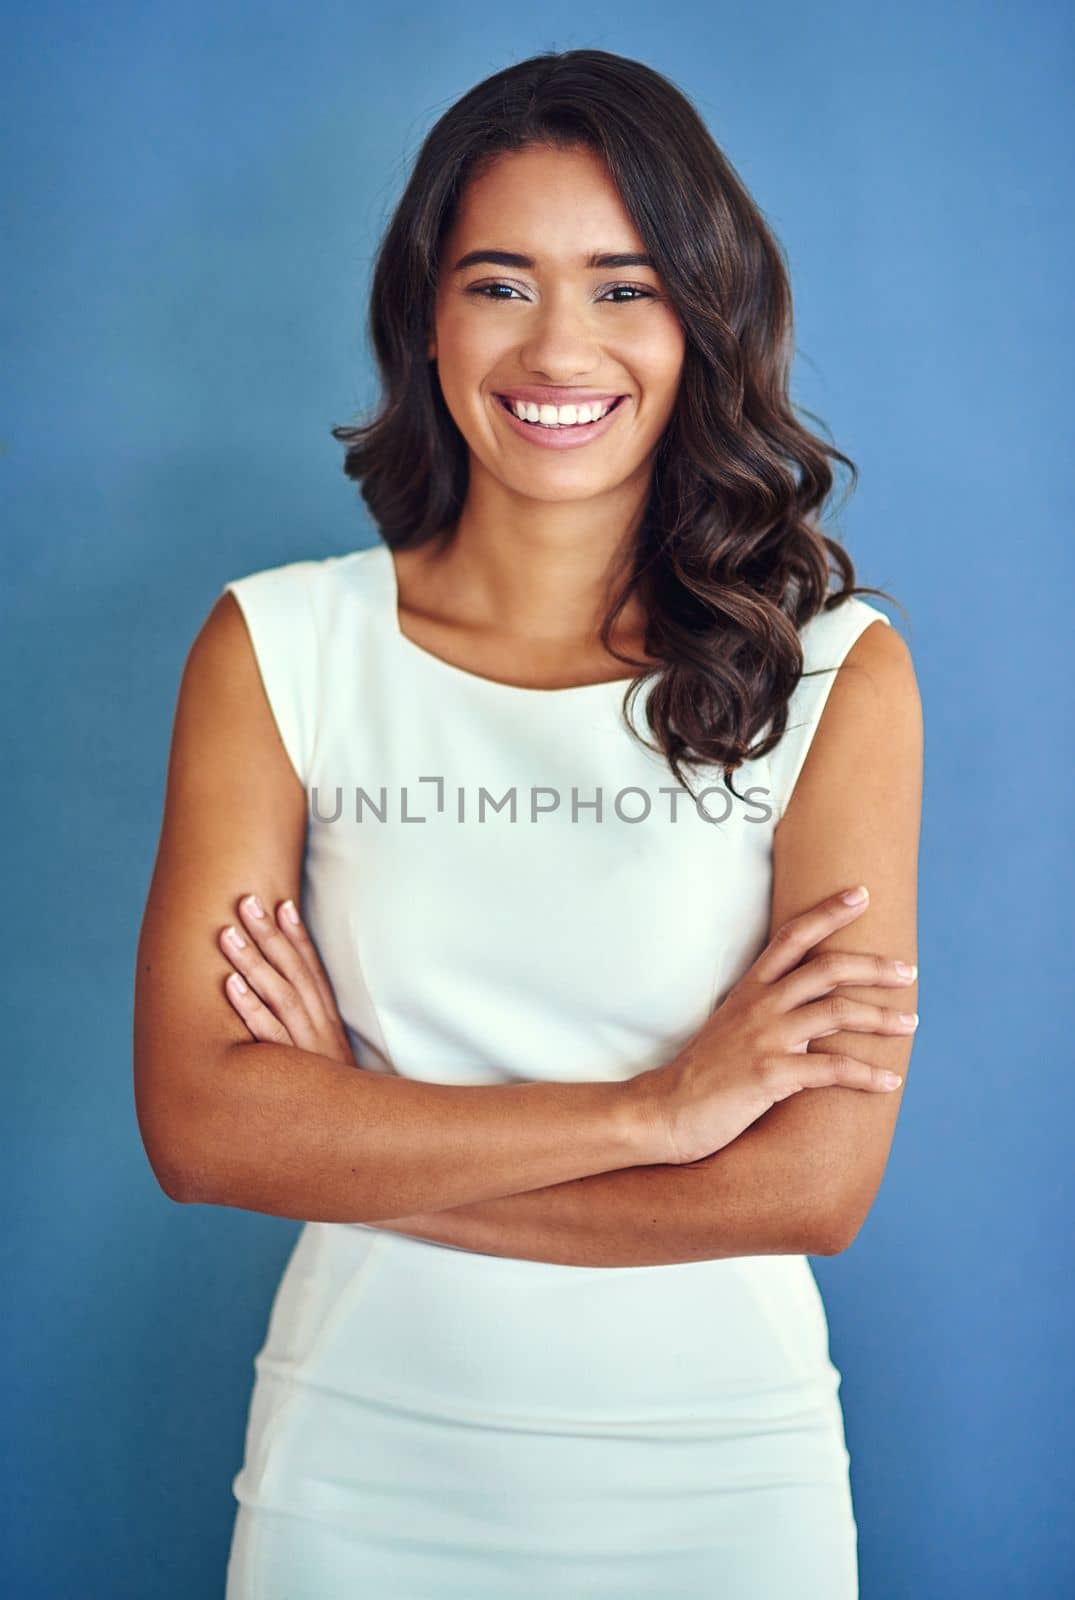 Its all about confidence. Studio portrait of a confident young woman posing against a blue background